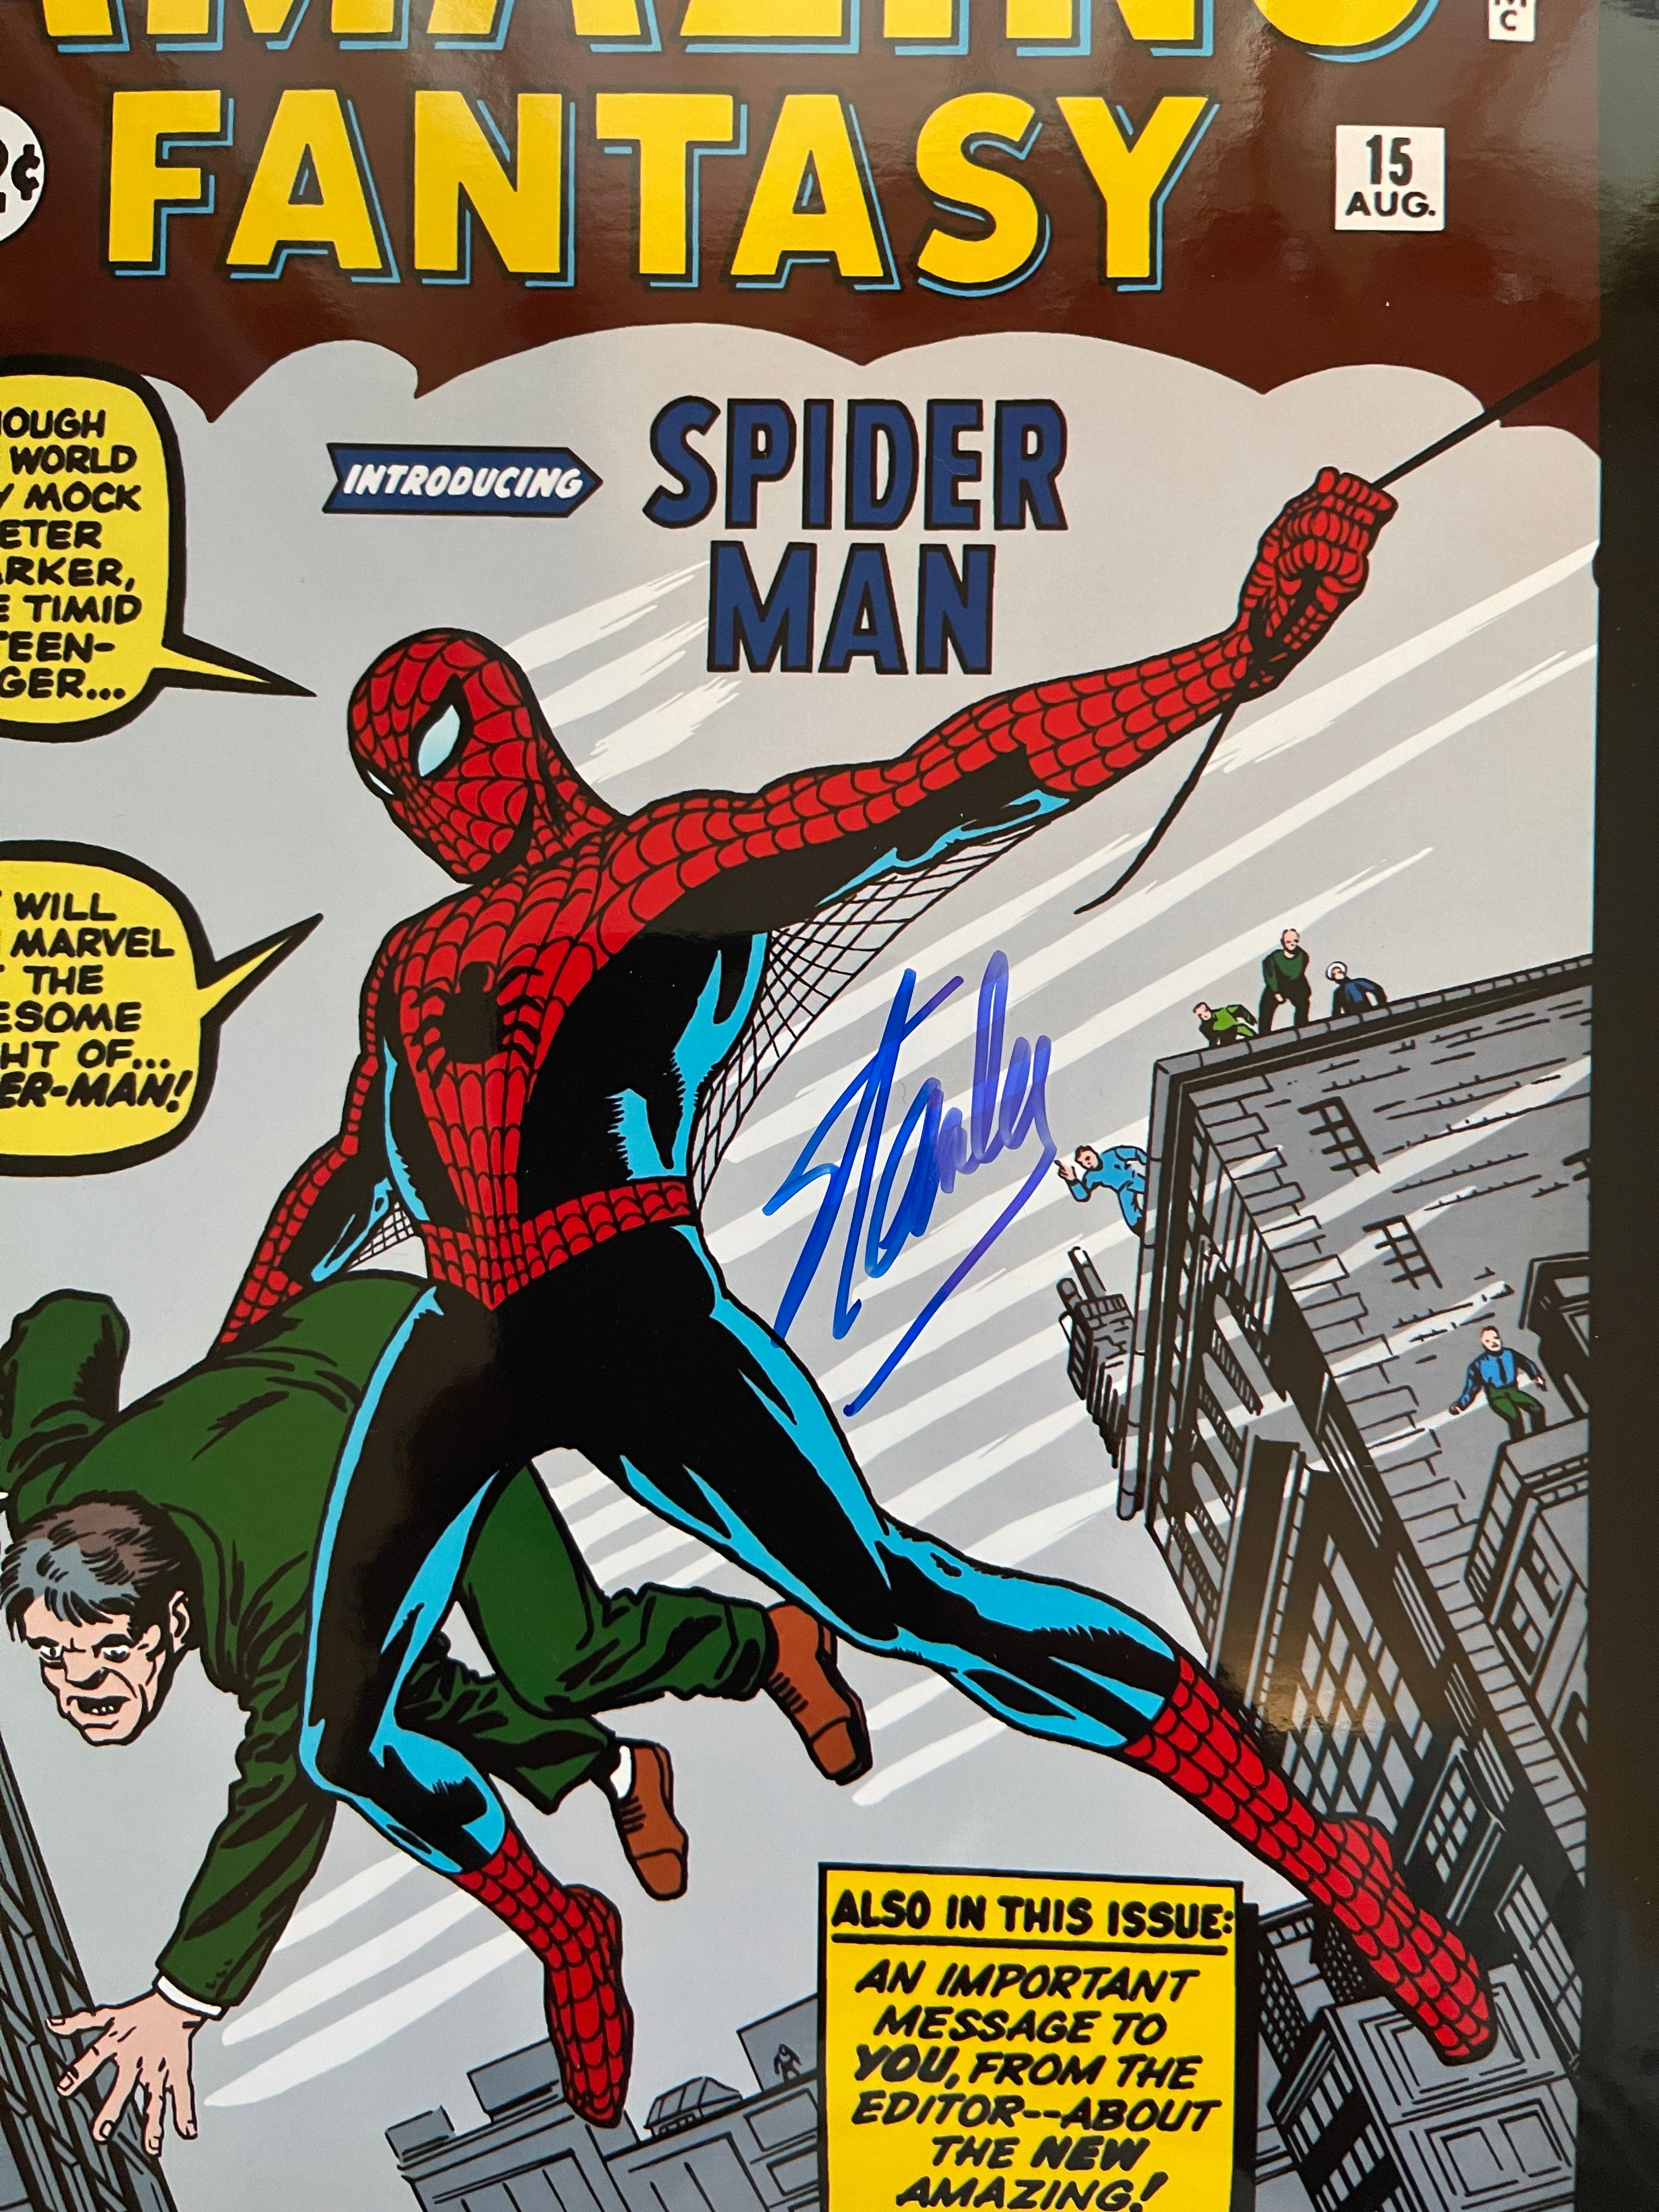 Spider-Man Amazing Fantasy 15 autograph by Stan Lee glossy photo certified by Fanexpo